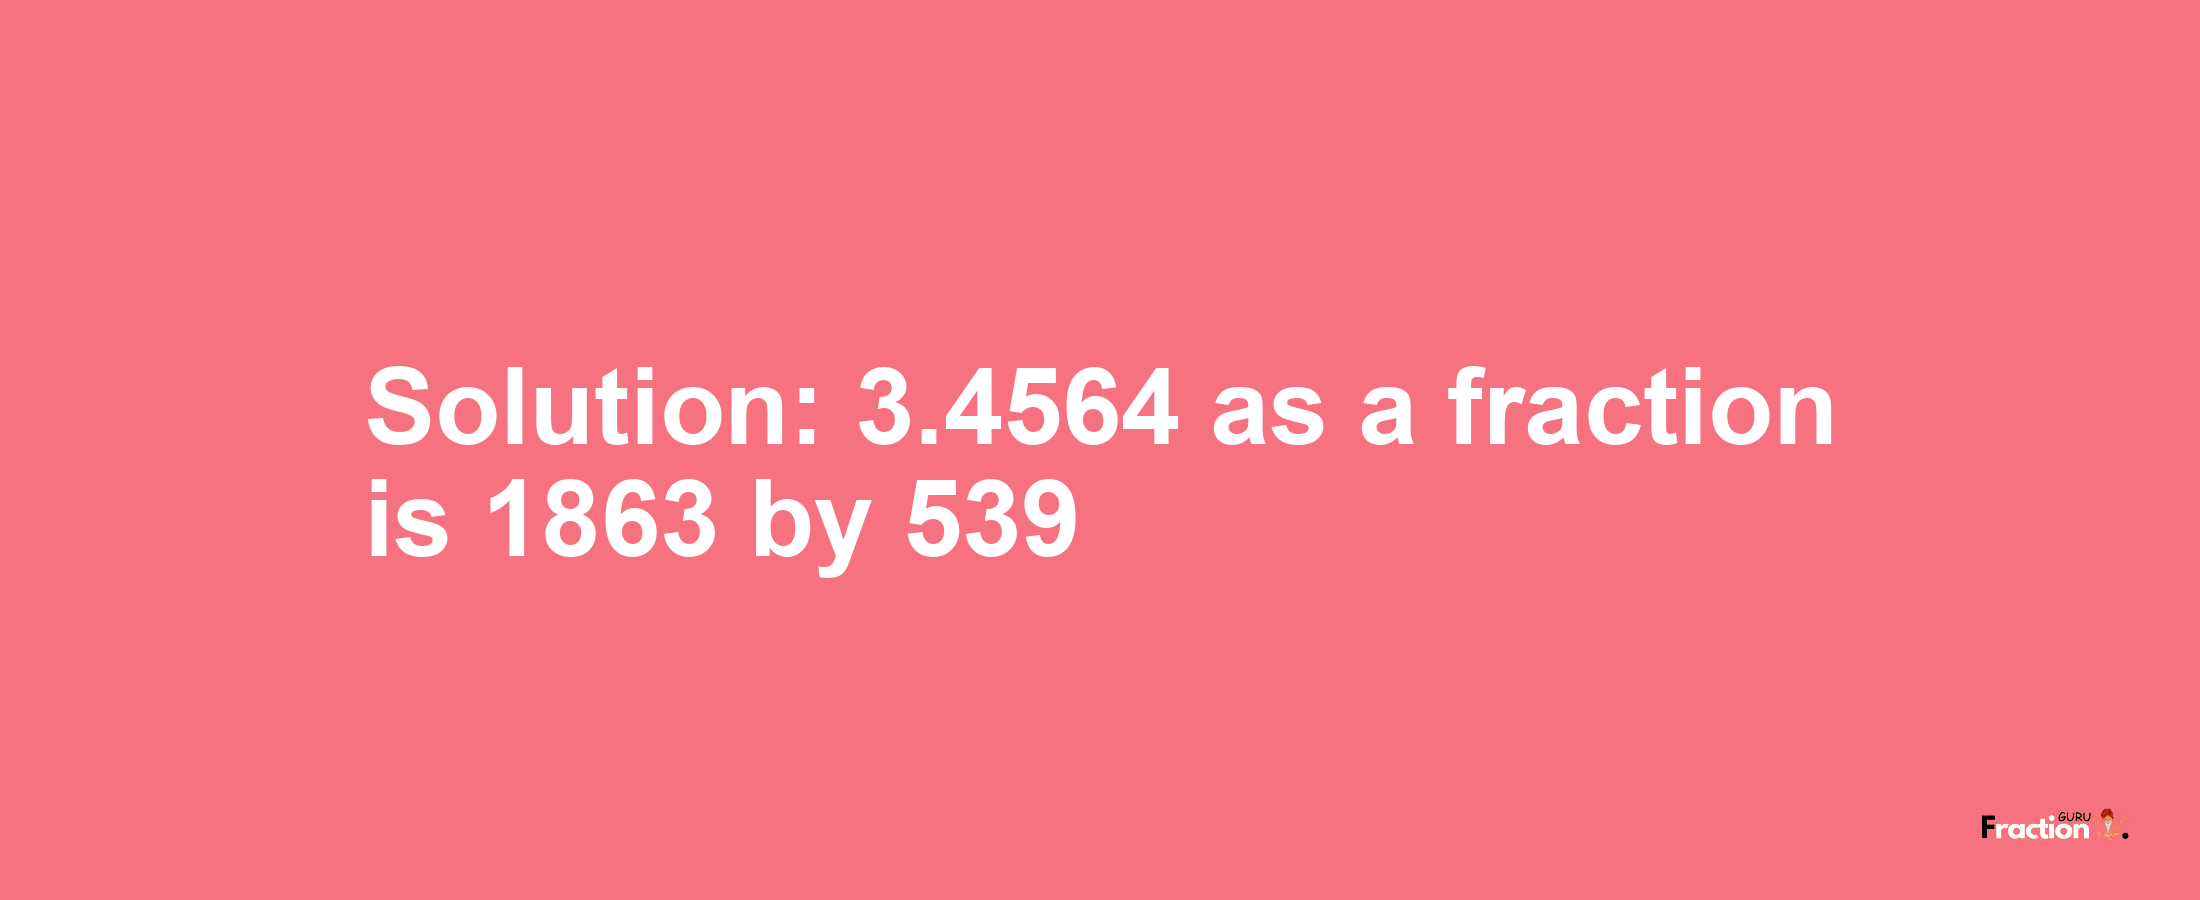 Solution:3.4564 as a fraction is 1863/539